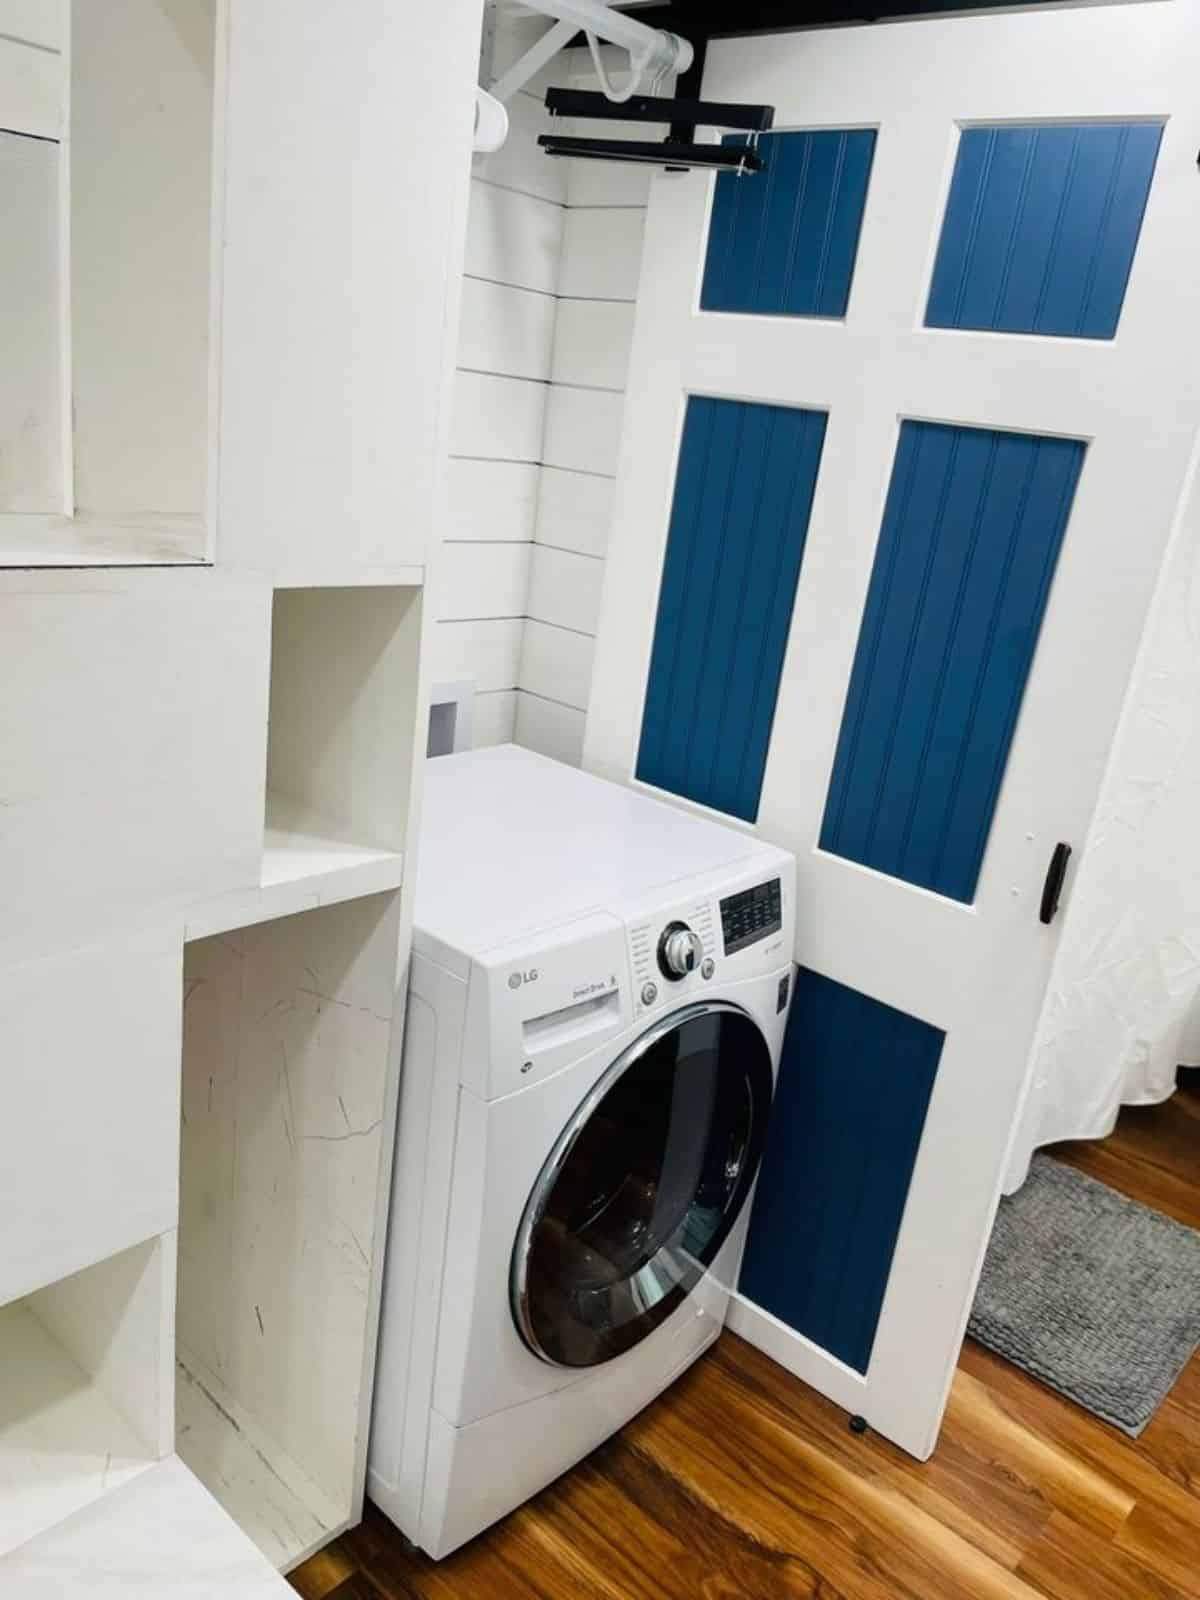 washer dryer combo in bathroom of fully equipped home